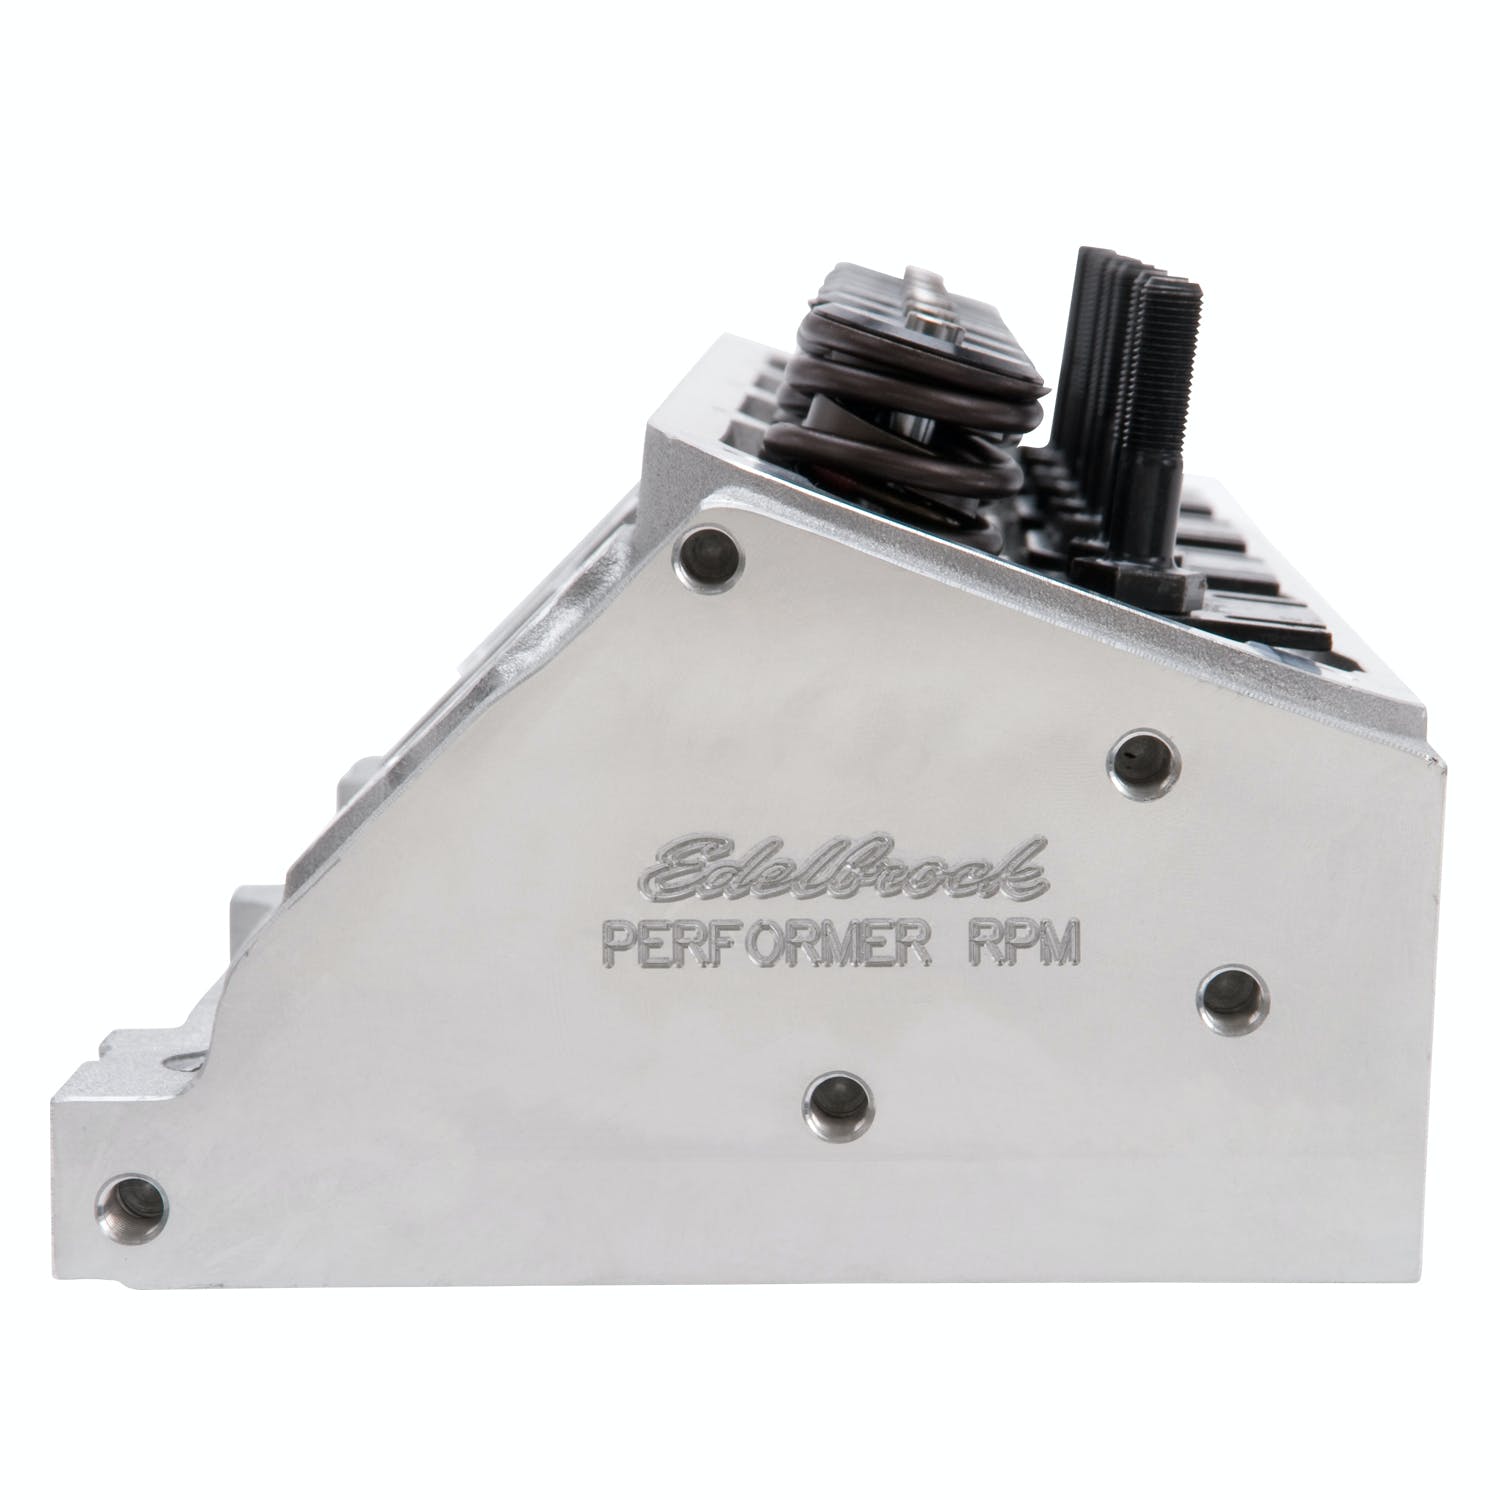 Edelbrock 61775 CYL HEAD SB CHRYSLER PERF RPM 5.2 and 5.9L MAGNUM FOR HYD ROLLER CAMS COMPLETE